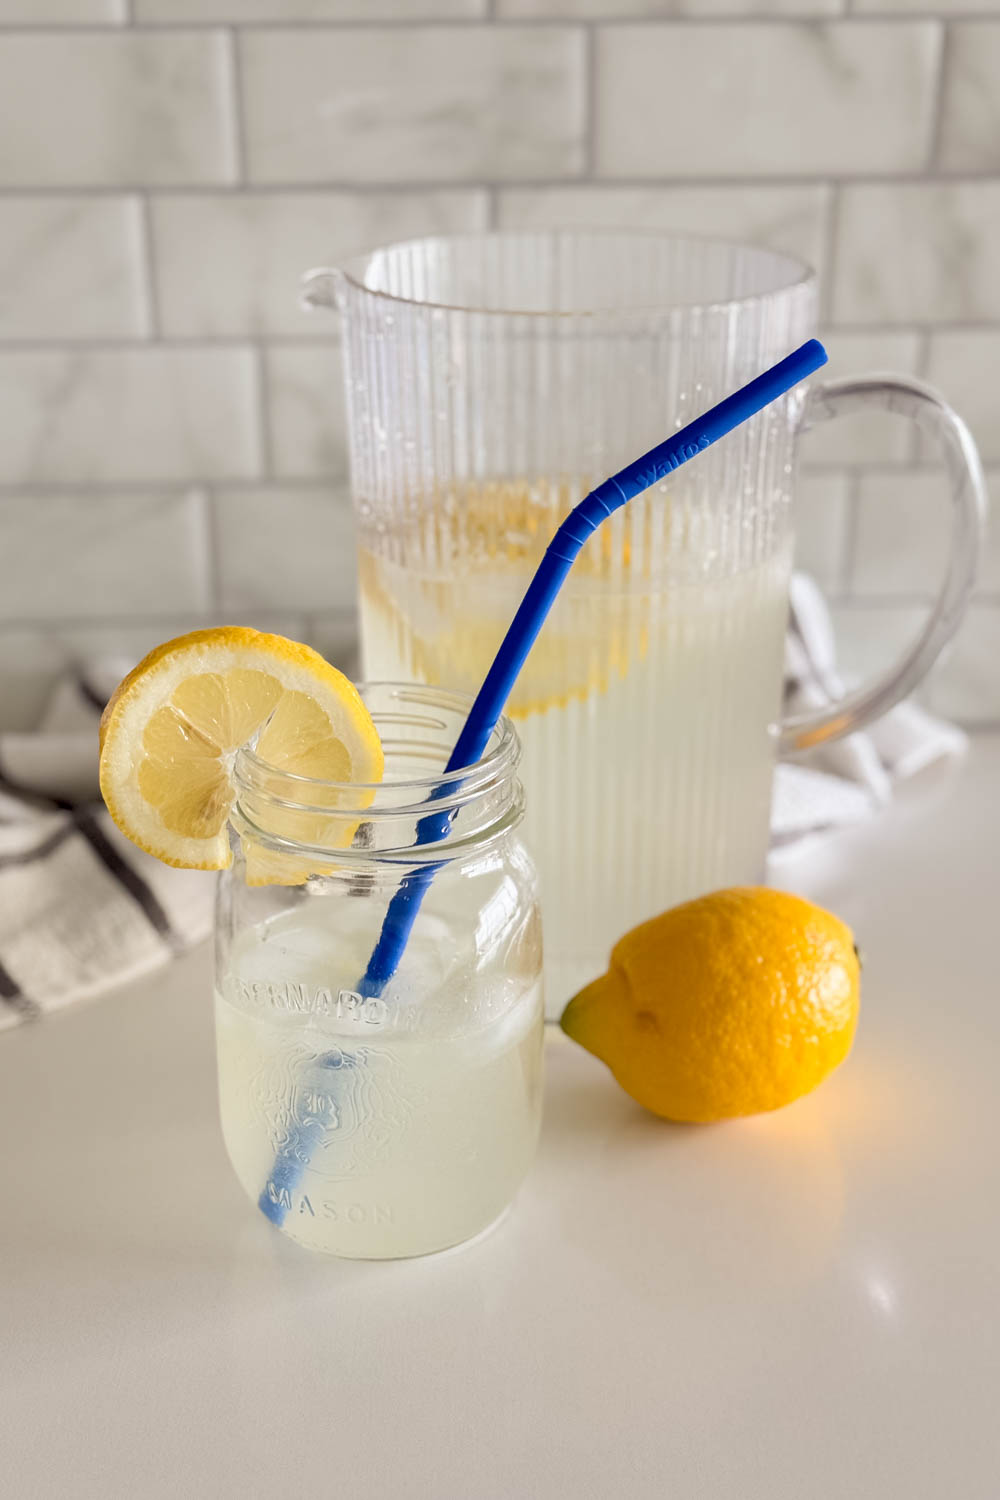 A glass of fresh homemade lemonade next to a full pitcher, with lemon slices and a full lemon